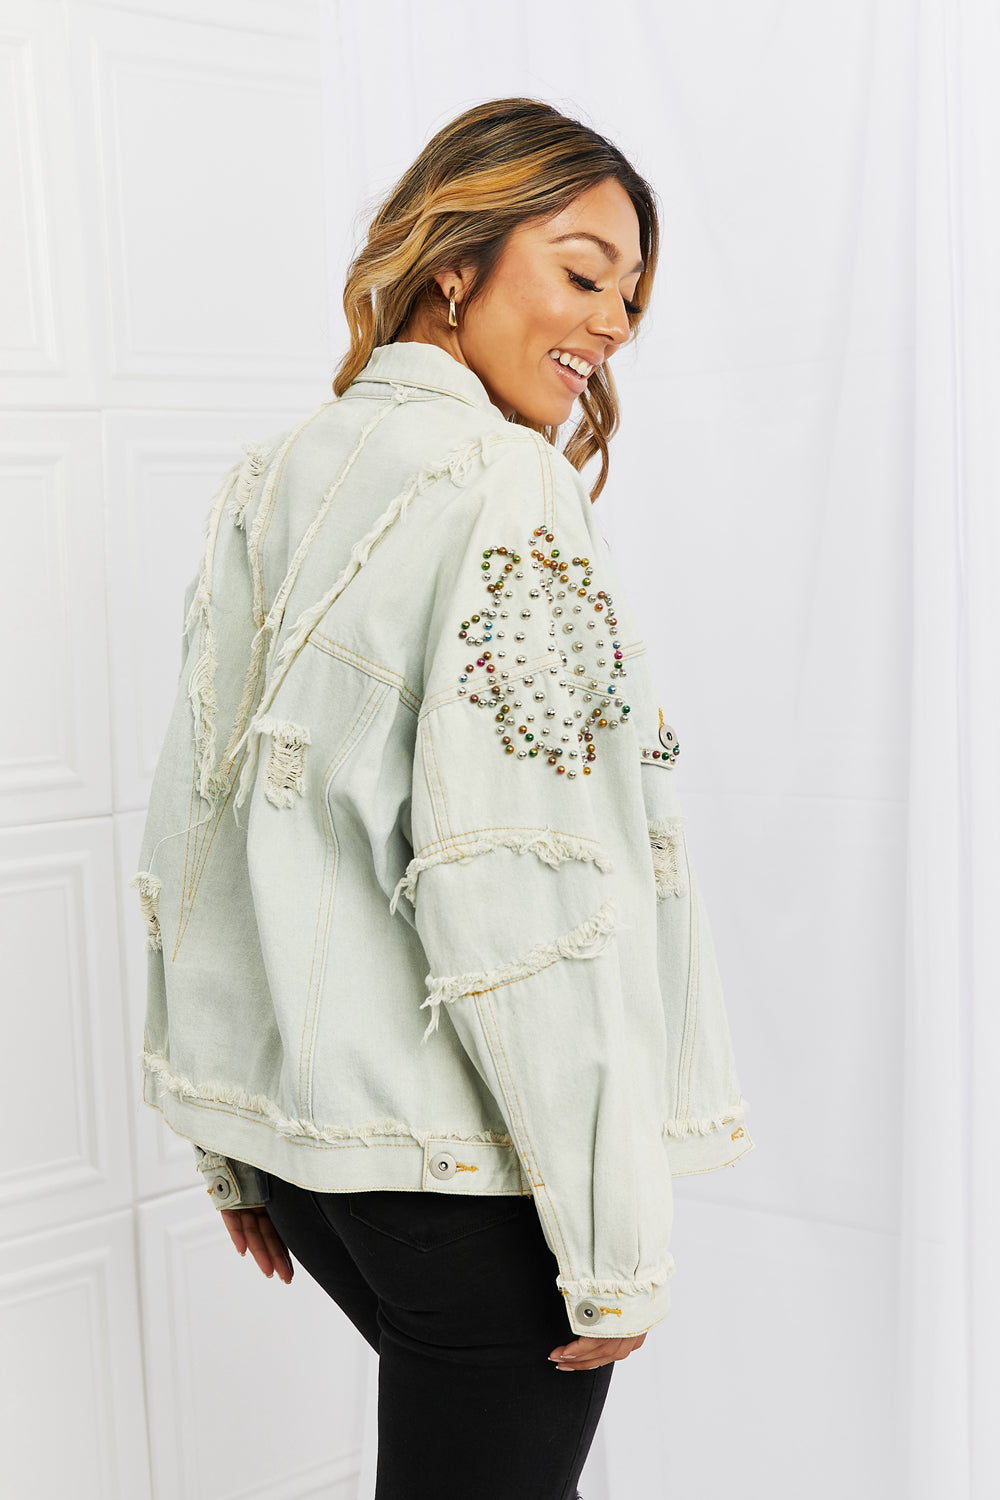 You will definitely turn head with this timeless denim jacket. This relaxed fit jacket features button front closures, distressed detailing and colorful pearl beaded details along the sleeves and front pockets. Pair with a dress or pants for an elevated casual look.